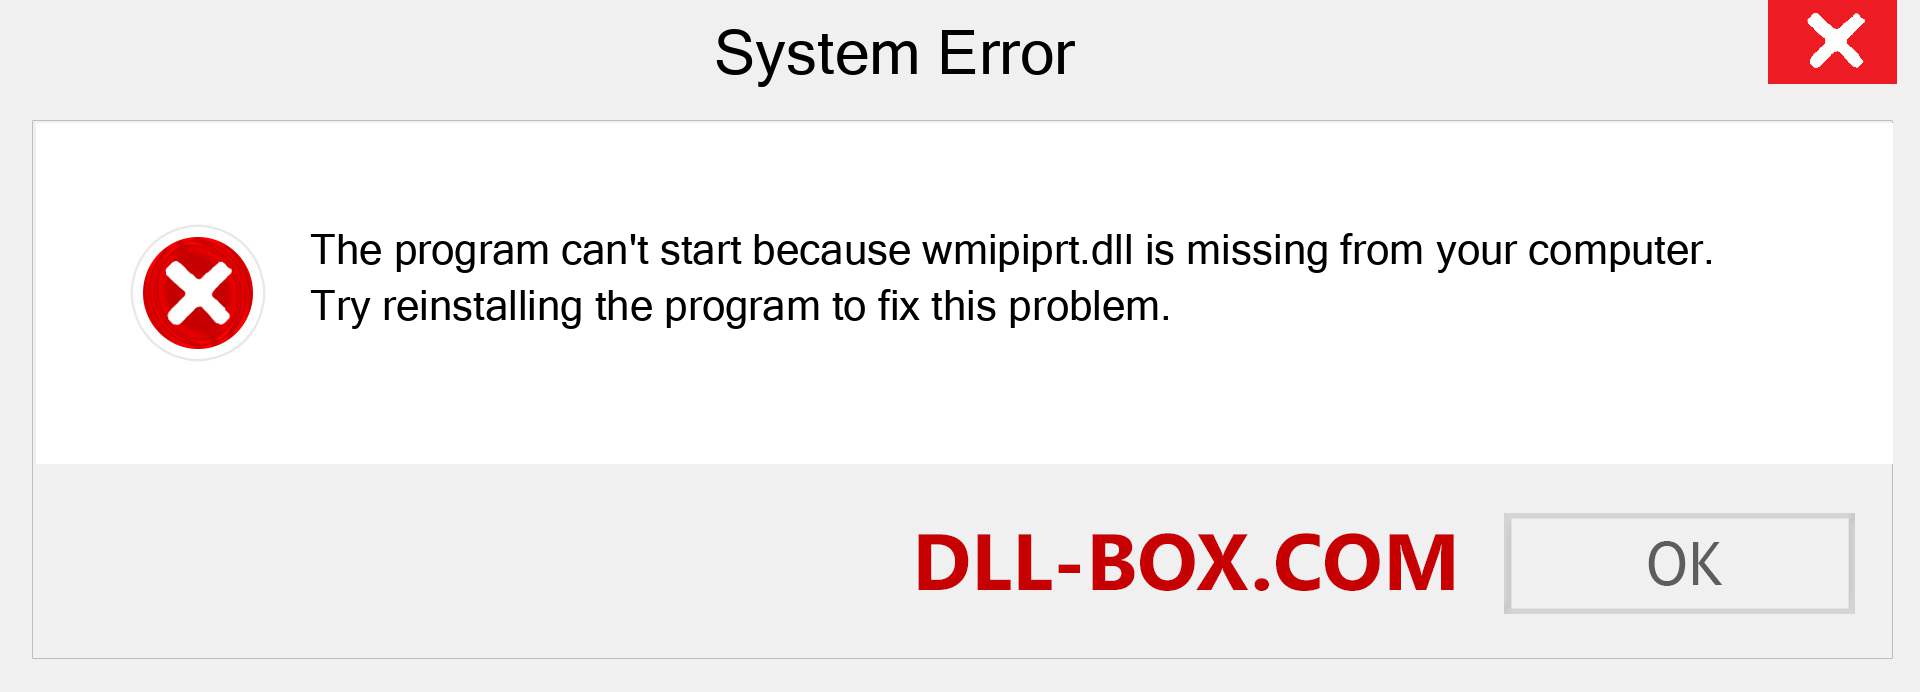  wmipiprt.dll file is missing?. Download for Windows 7, 8, 10 - Fix  wmipiprt dll Missing Error on Windows, photos, images